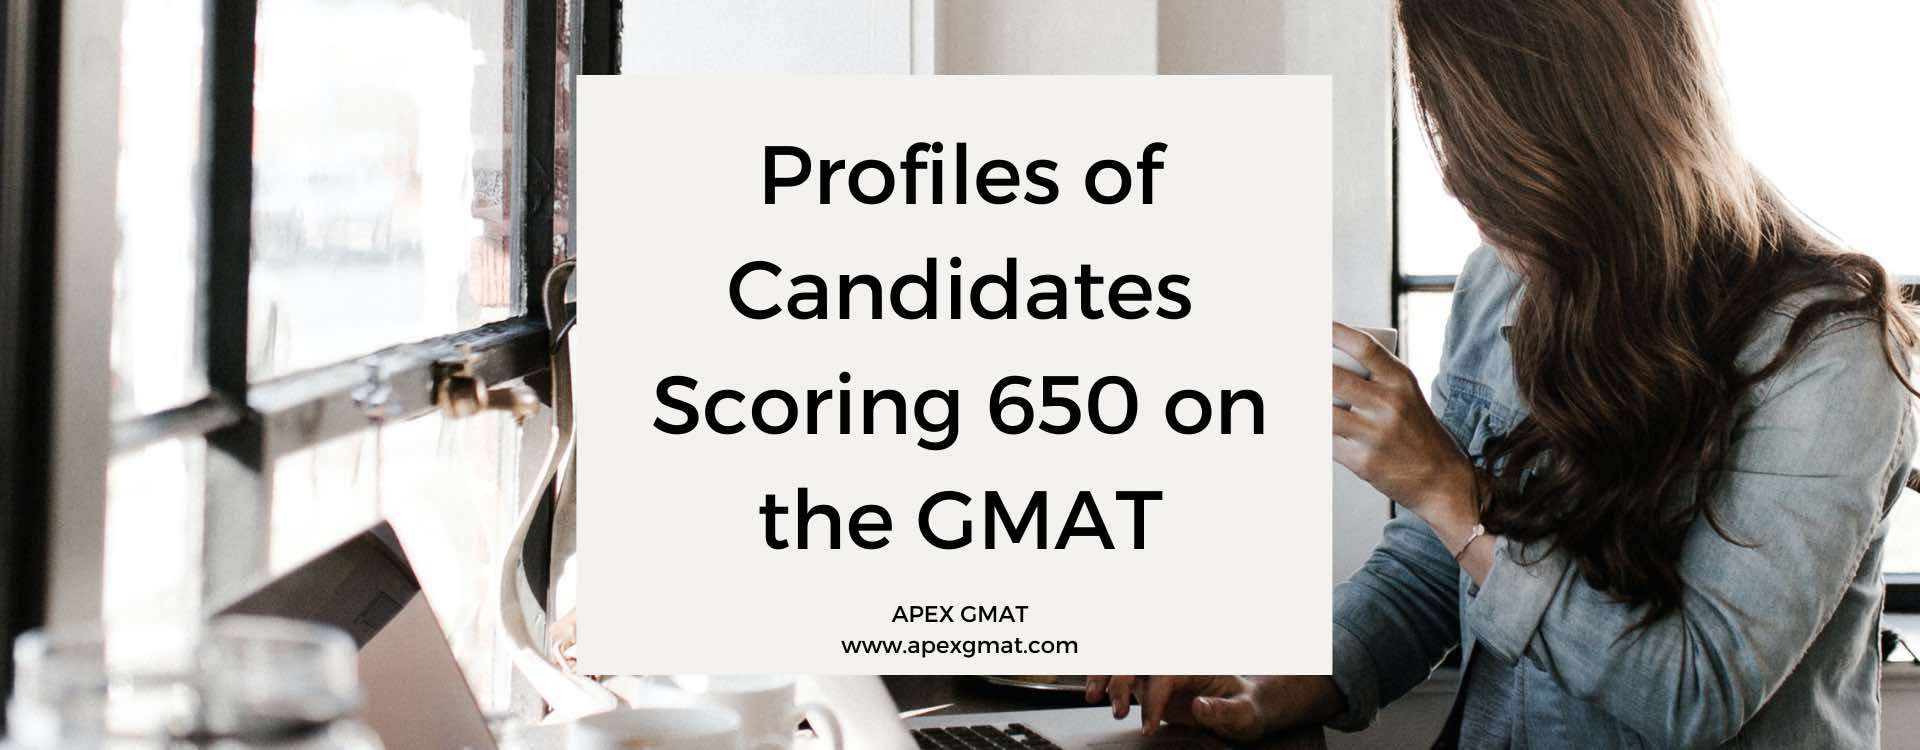 Profiles of Candidates Scoring 650 on the GMAT